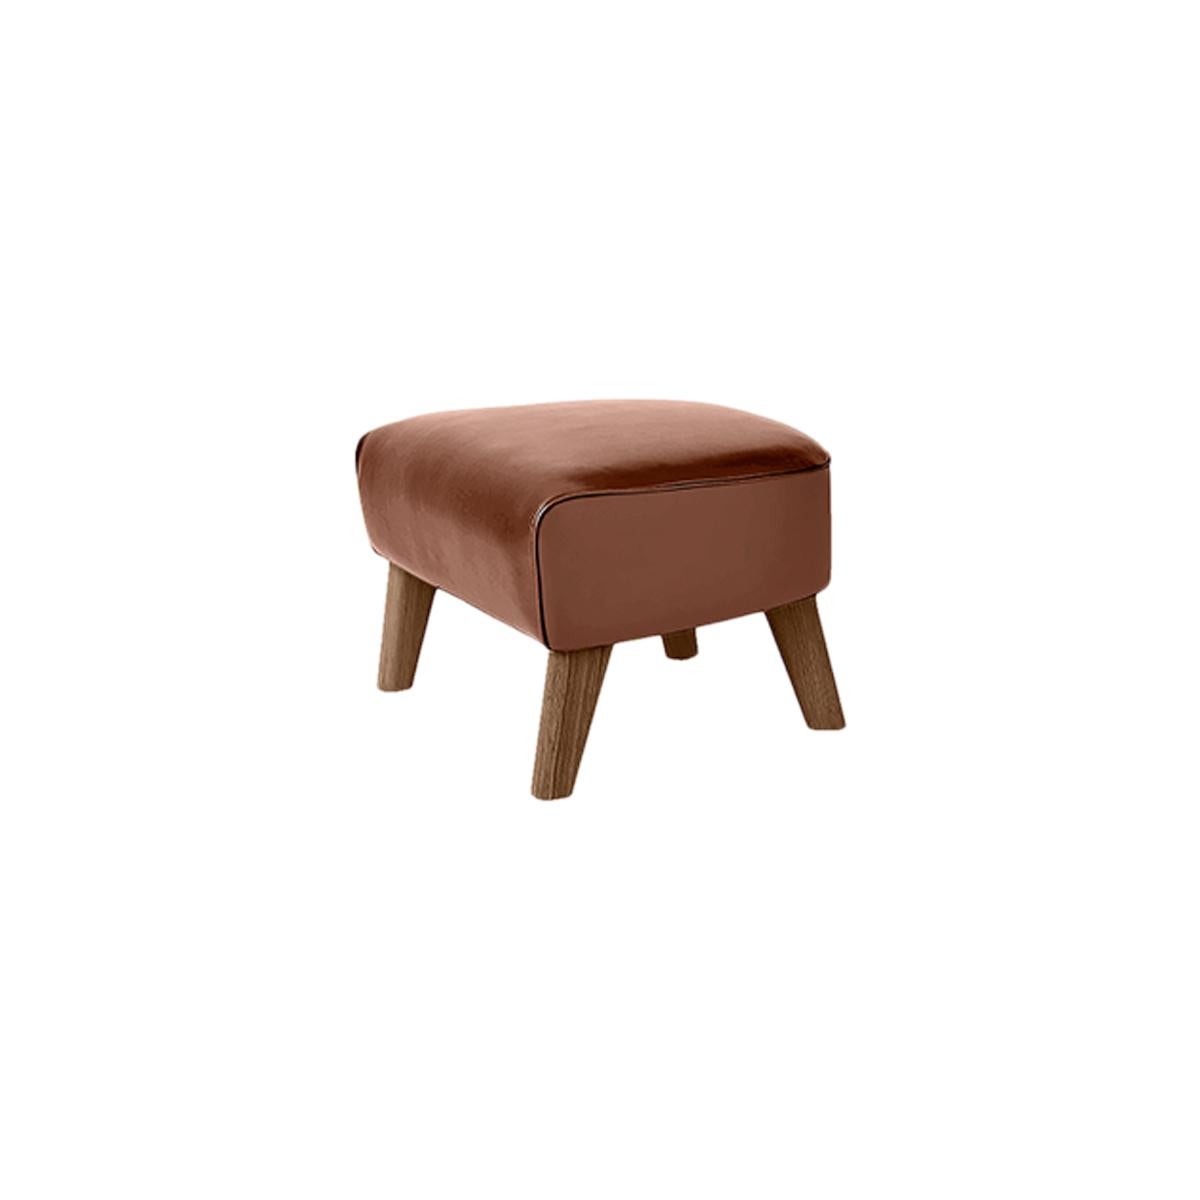 Brown leather and smoked Oak My Own Chair footstool by Lassen
Dimensions: w 56 x d 58 x h 40 cm 
Materials: Leather

The My Own Chair footstool has been designed in the same spirit as Flemming Lassen’s original iconic chair, reflecting his love